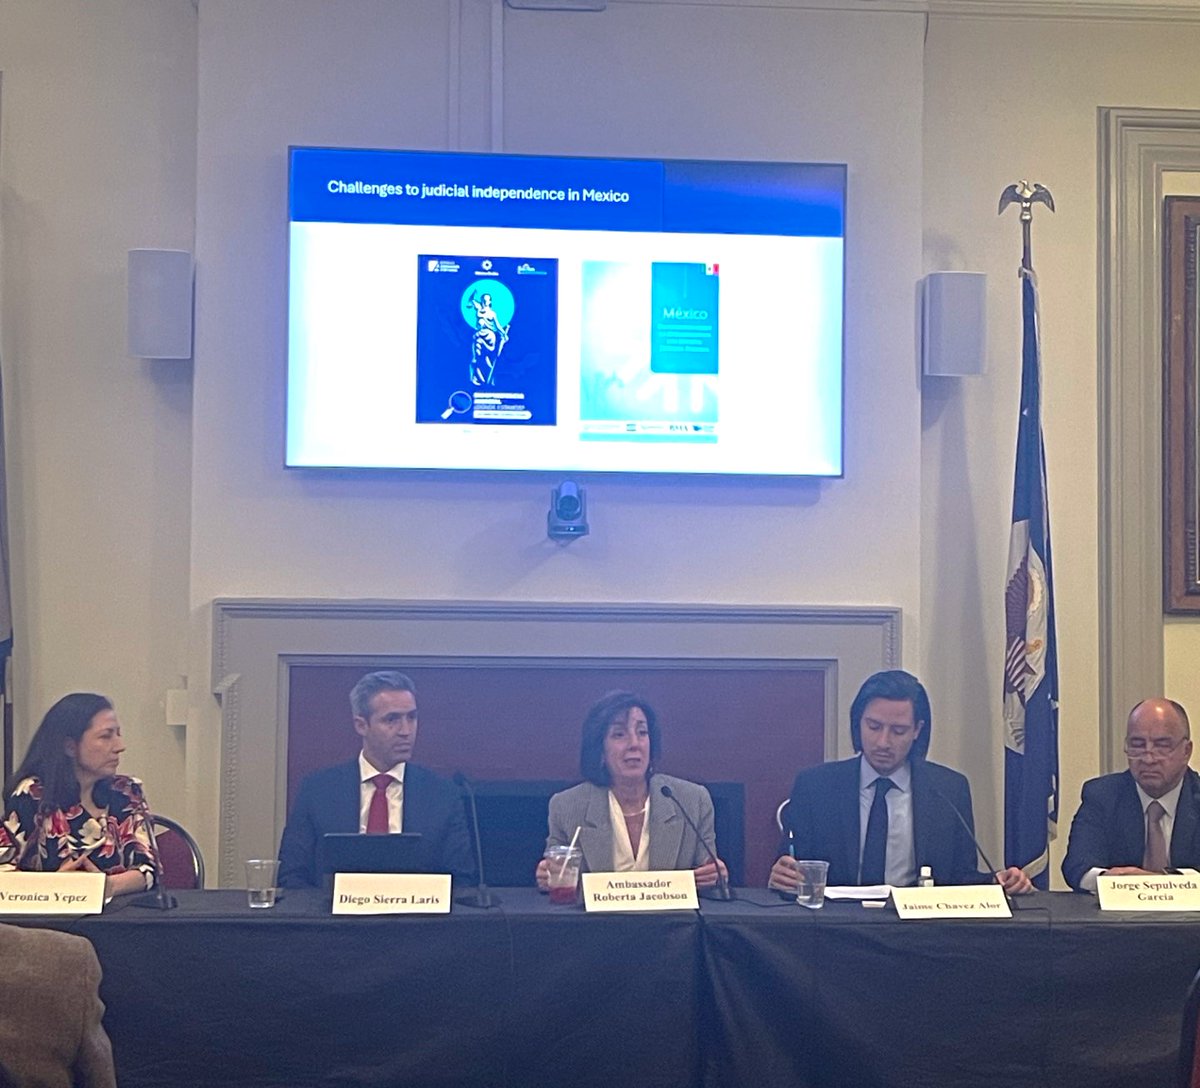 We were pleased to host a fascinating, timely discussion of 'Mexico's Rule of Law at a Crossroads' at the @CityBar last night. Thanks to speakers @Jacobson_RS, Verónica Yepez of @Covington, @BMA_Abogados, Diego Sierra + @JJSepulvedaG and all who joined this lively conversation.